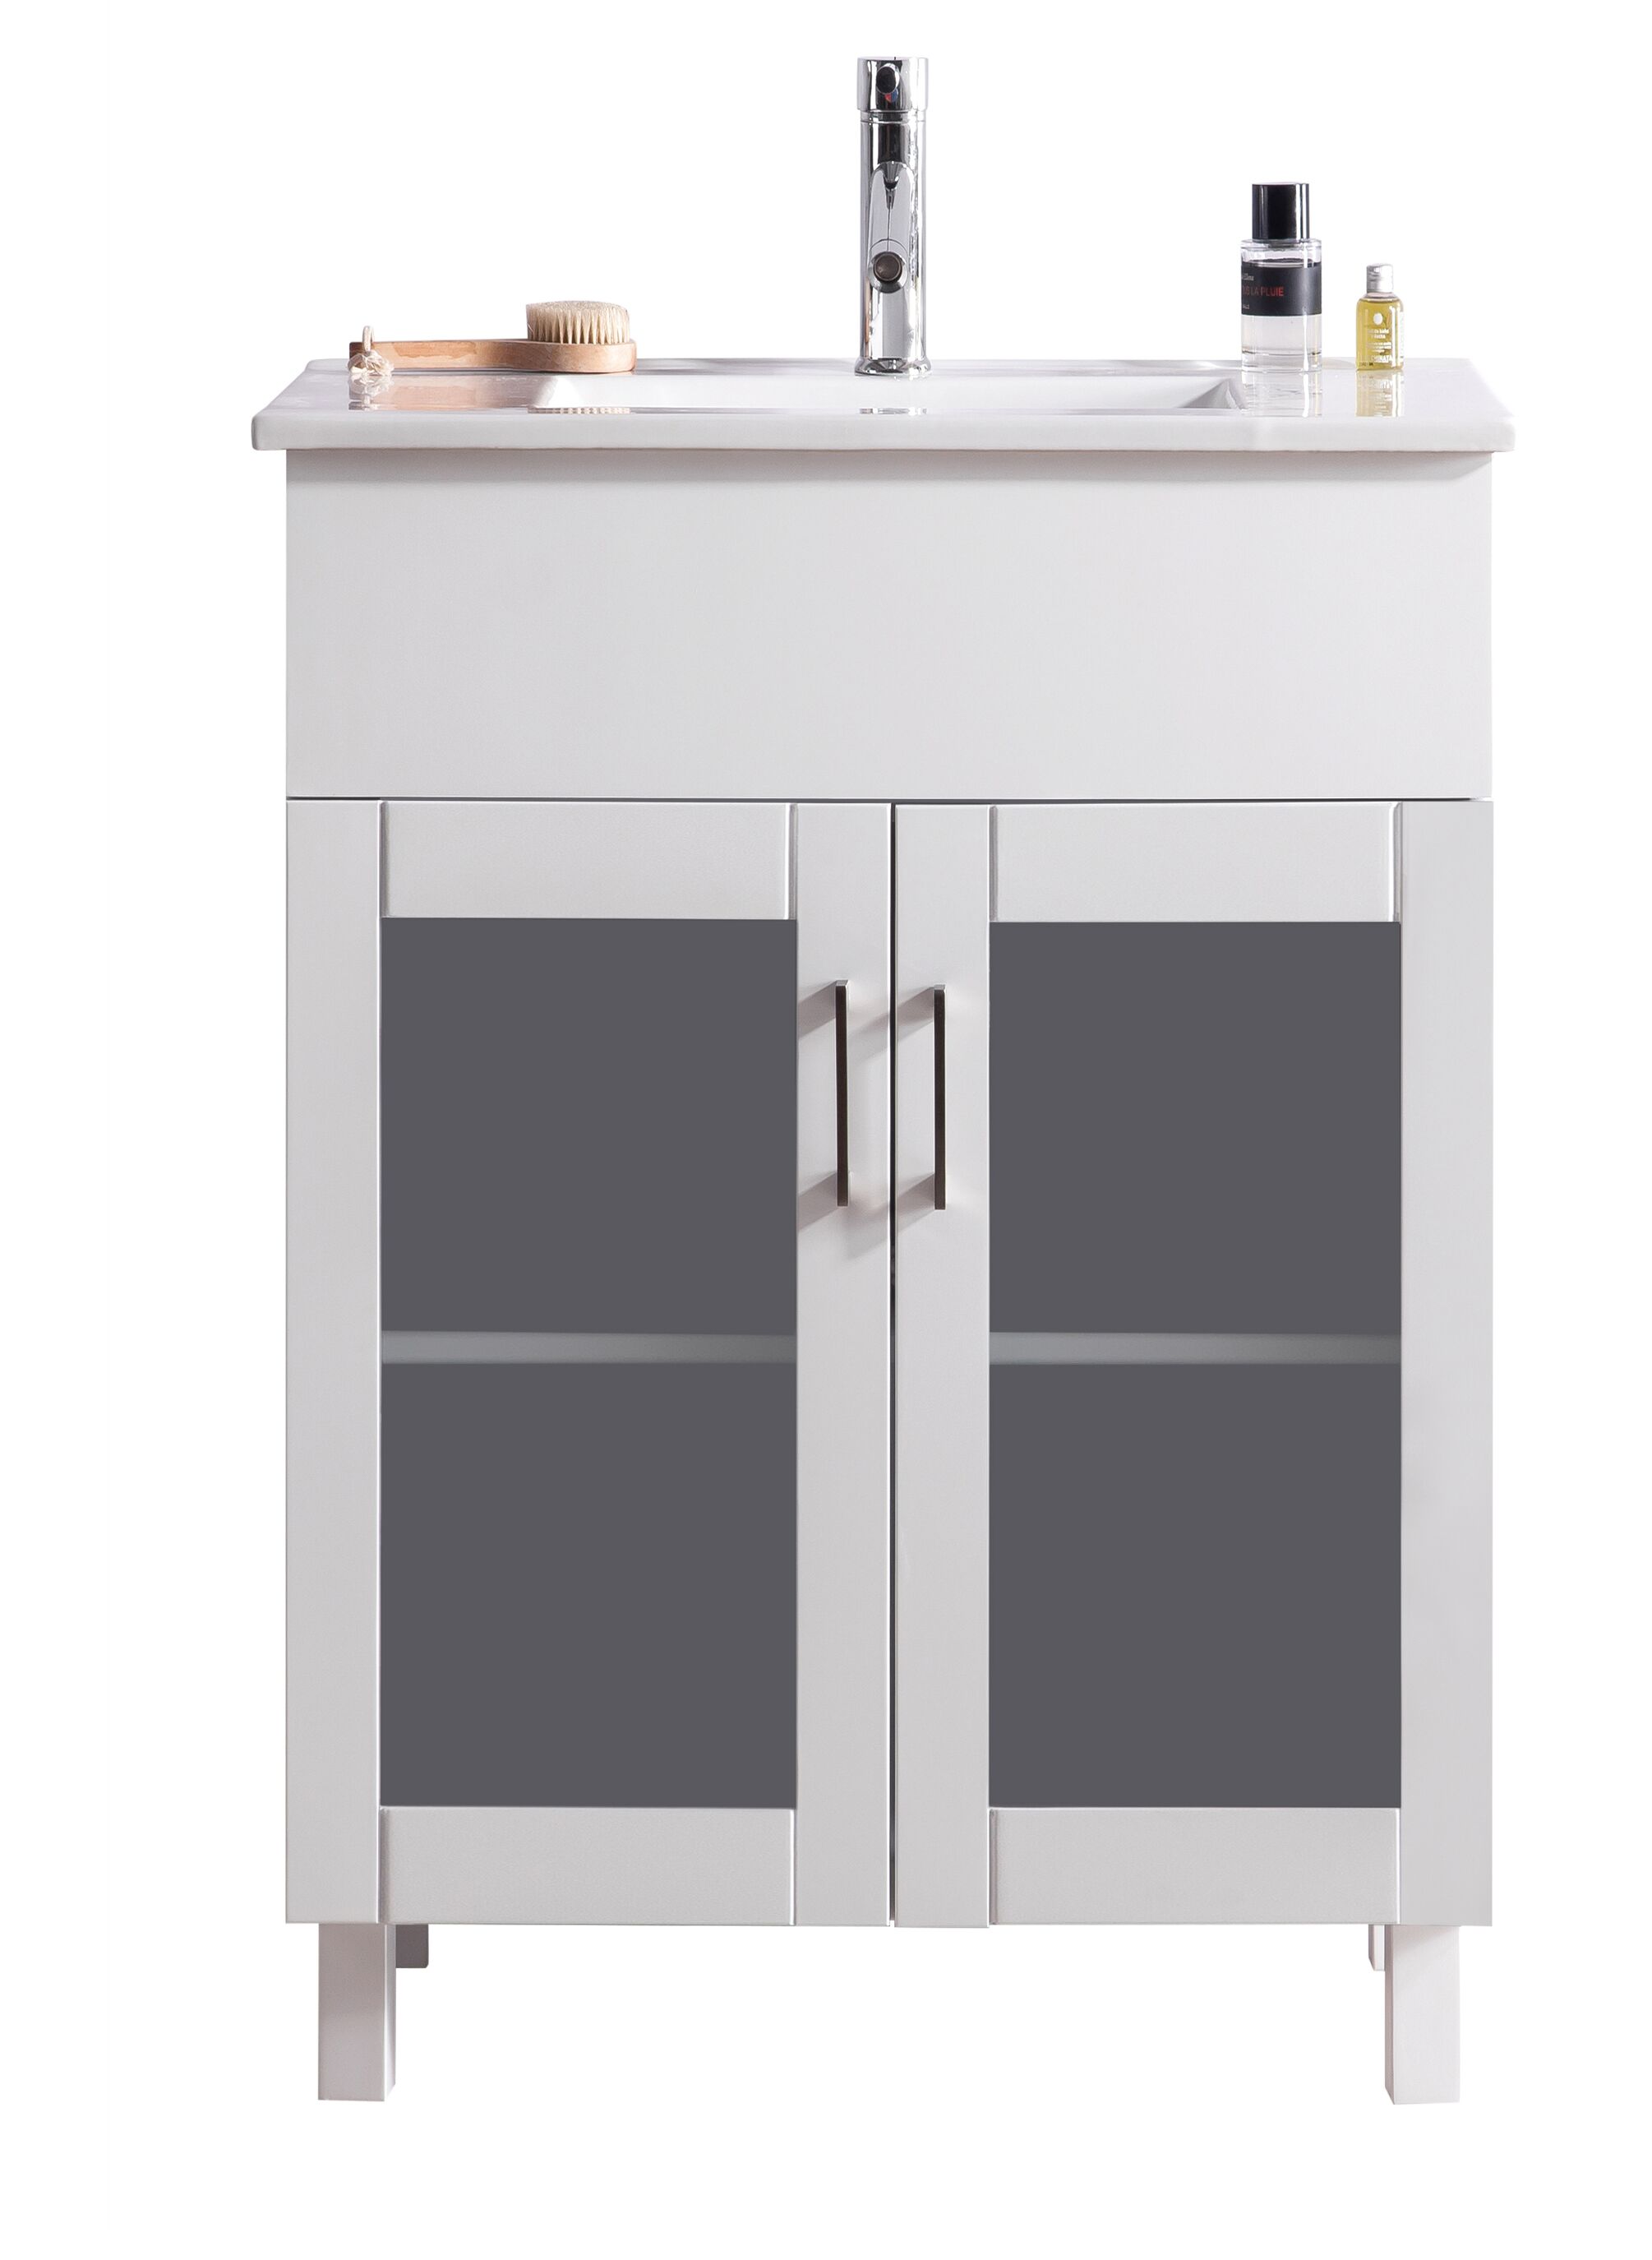 24" Single Bathroom Vanity Cabinet + Ceramic Basin Counter with Color and Mirror Options